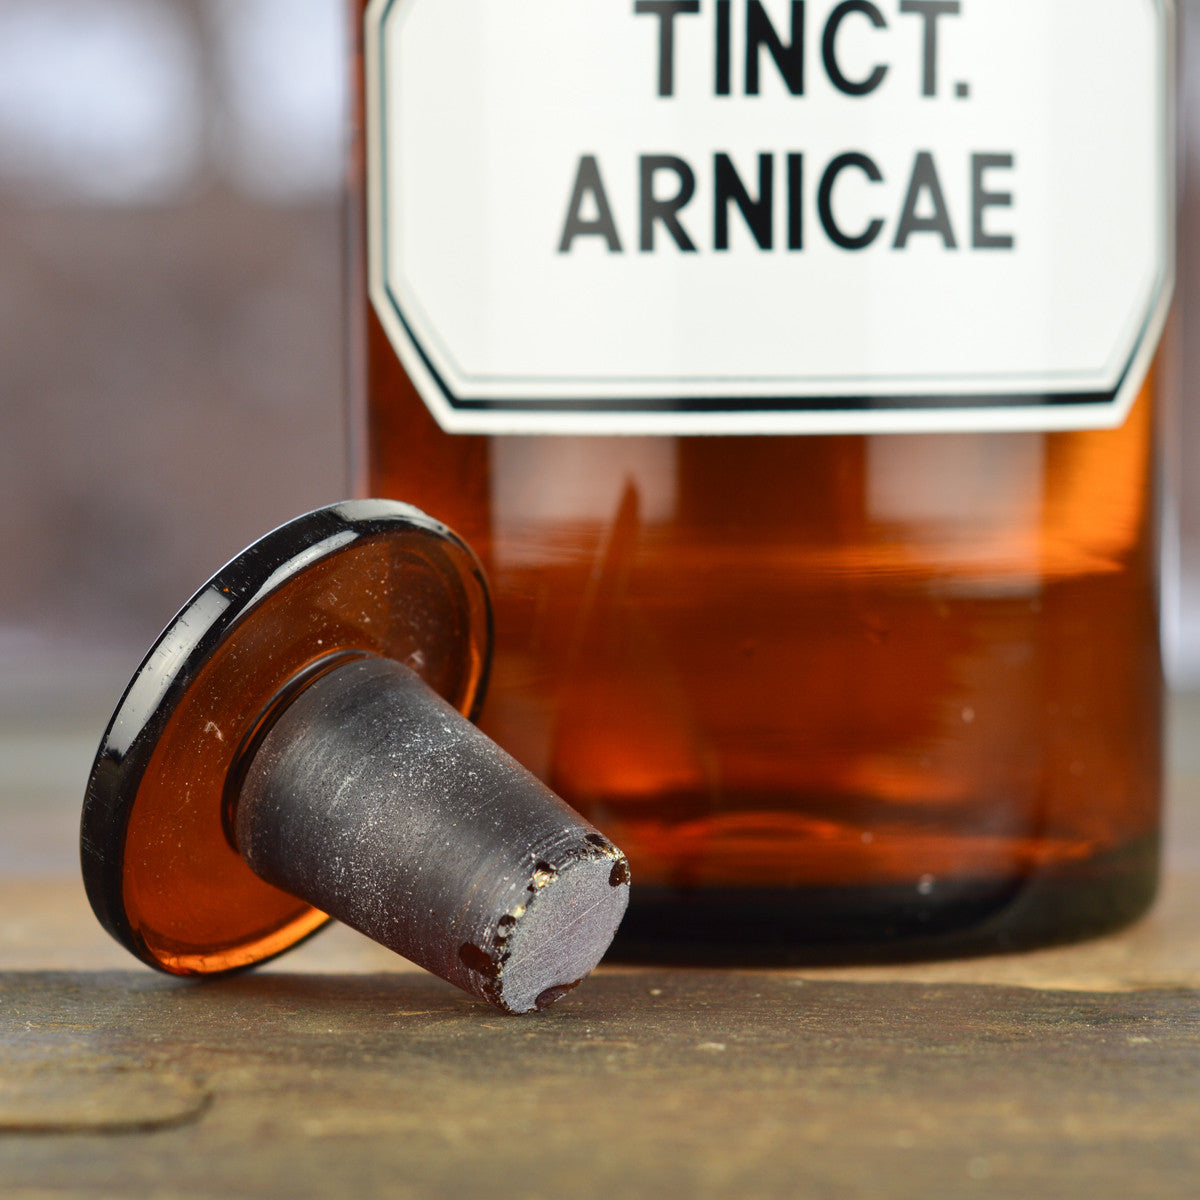 Vintage 1930’s - 1940’s Apothecary Jar with Latin Label TINCT. ARNICAE. and Round Stopper